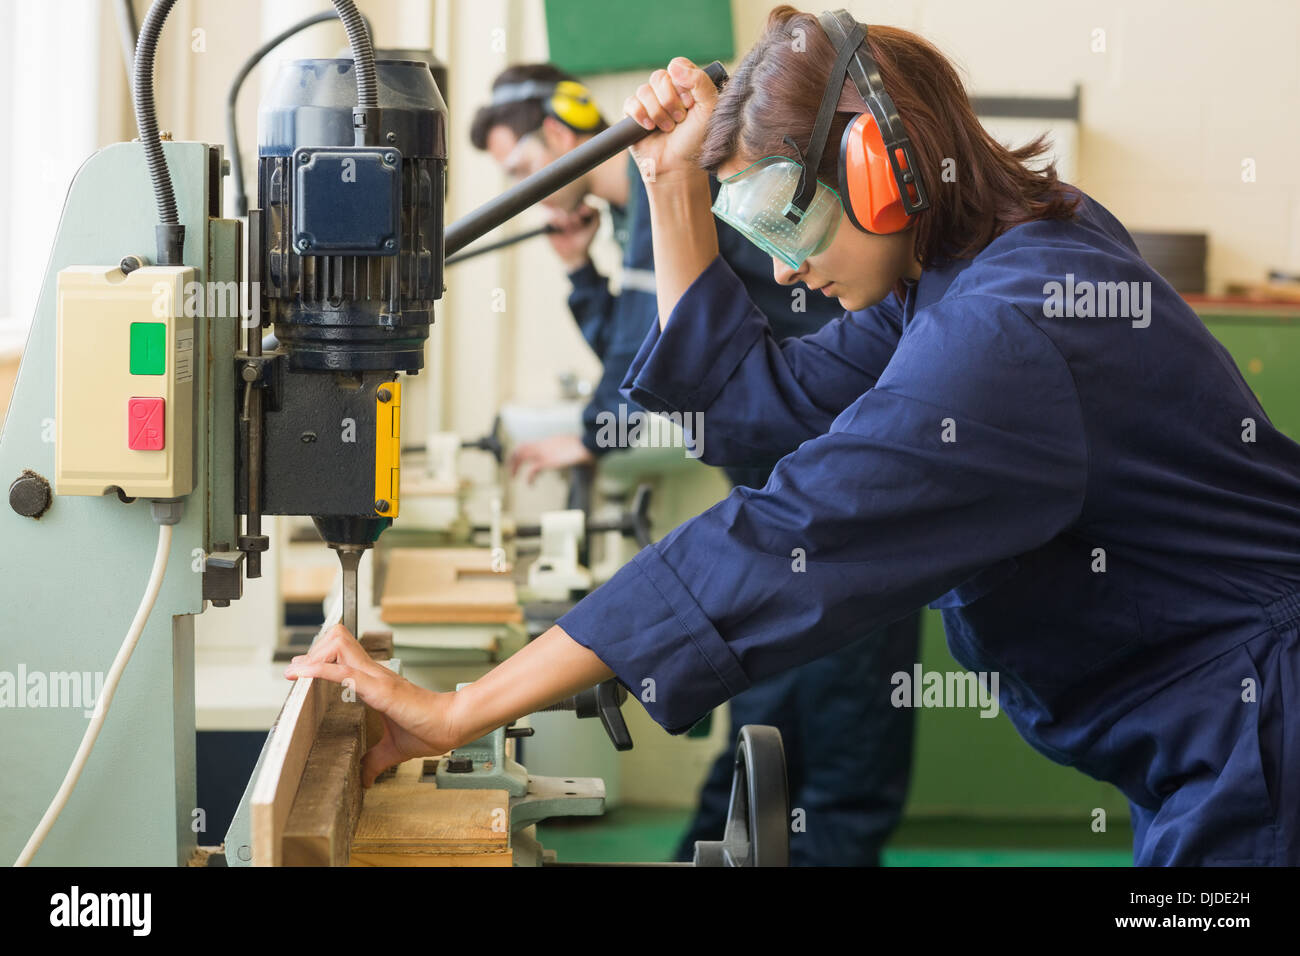 Trainee with safety glasses drilling wood Stock Photo